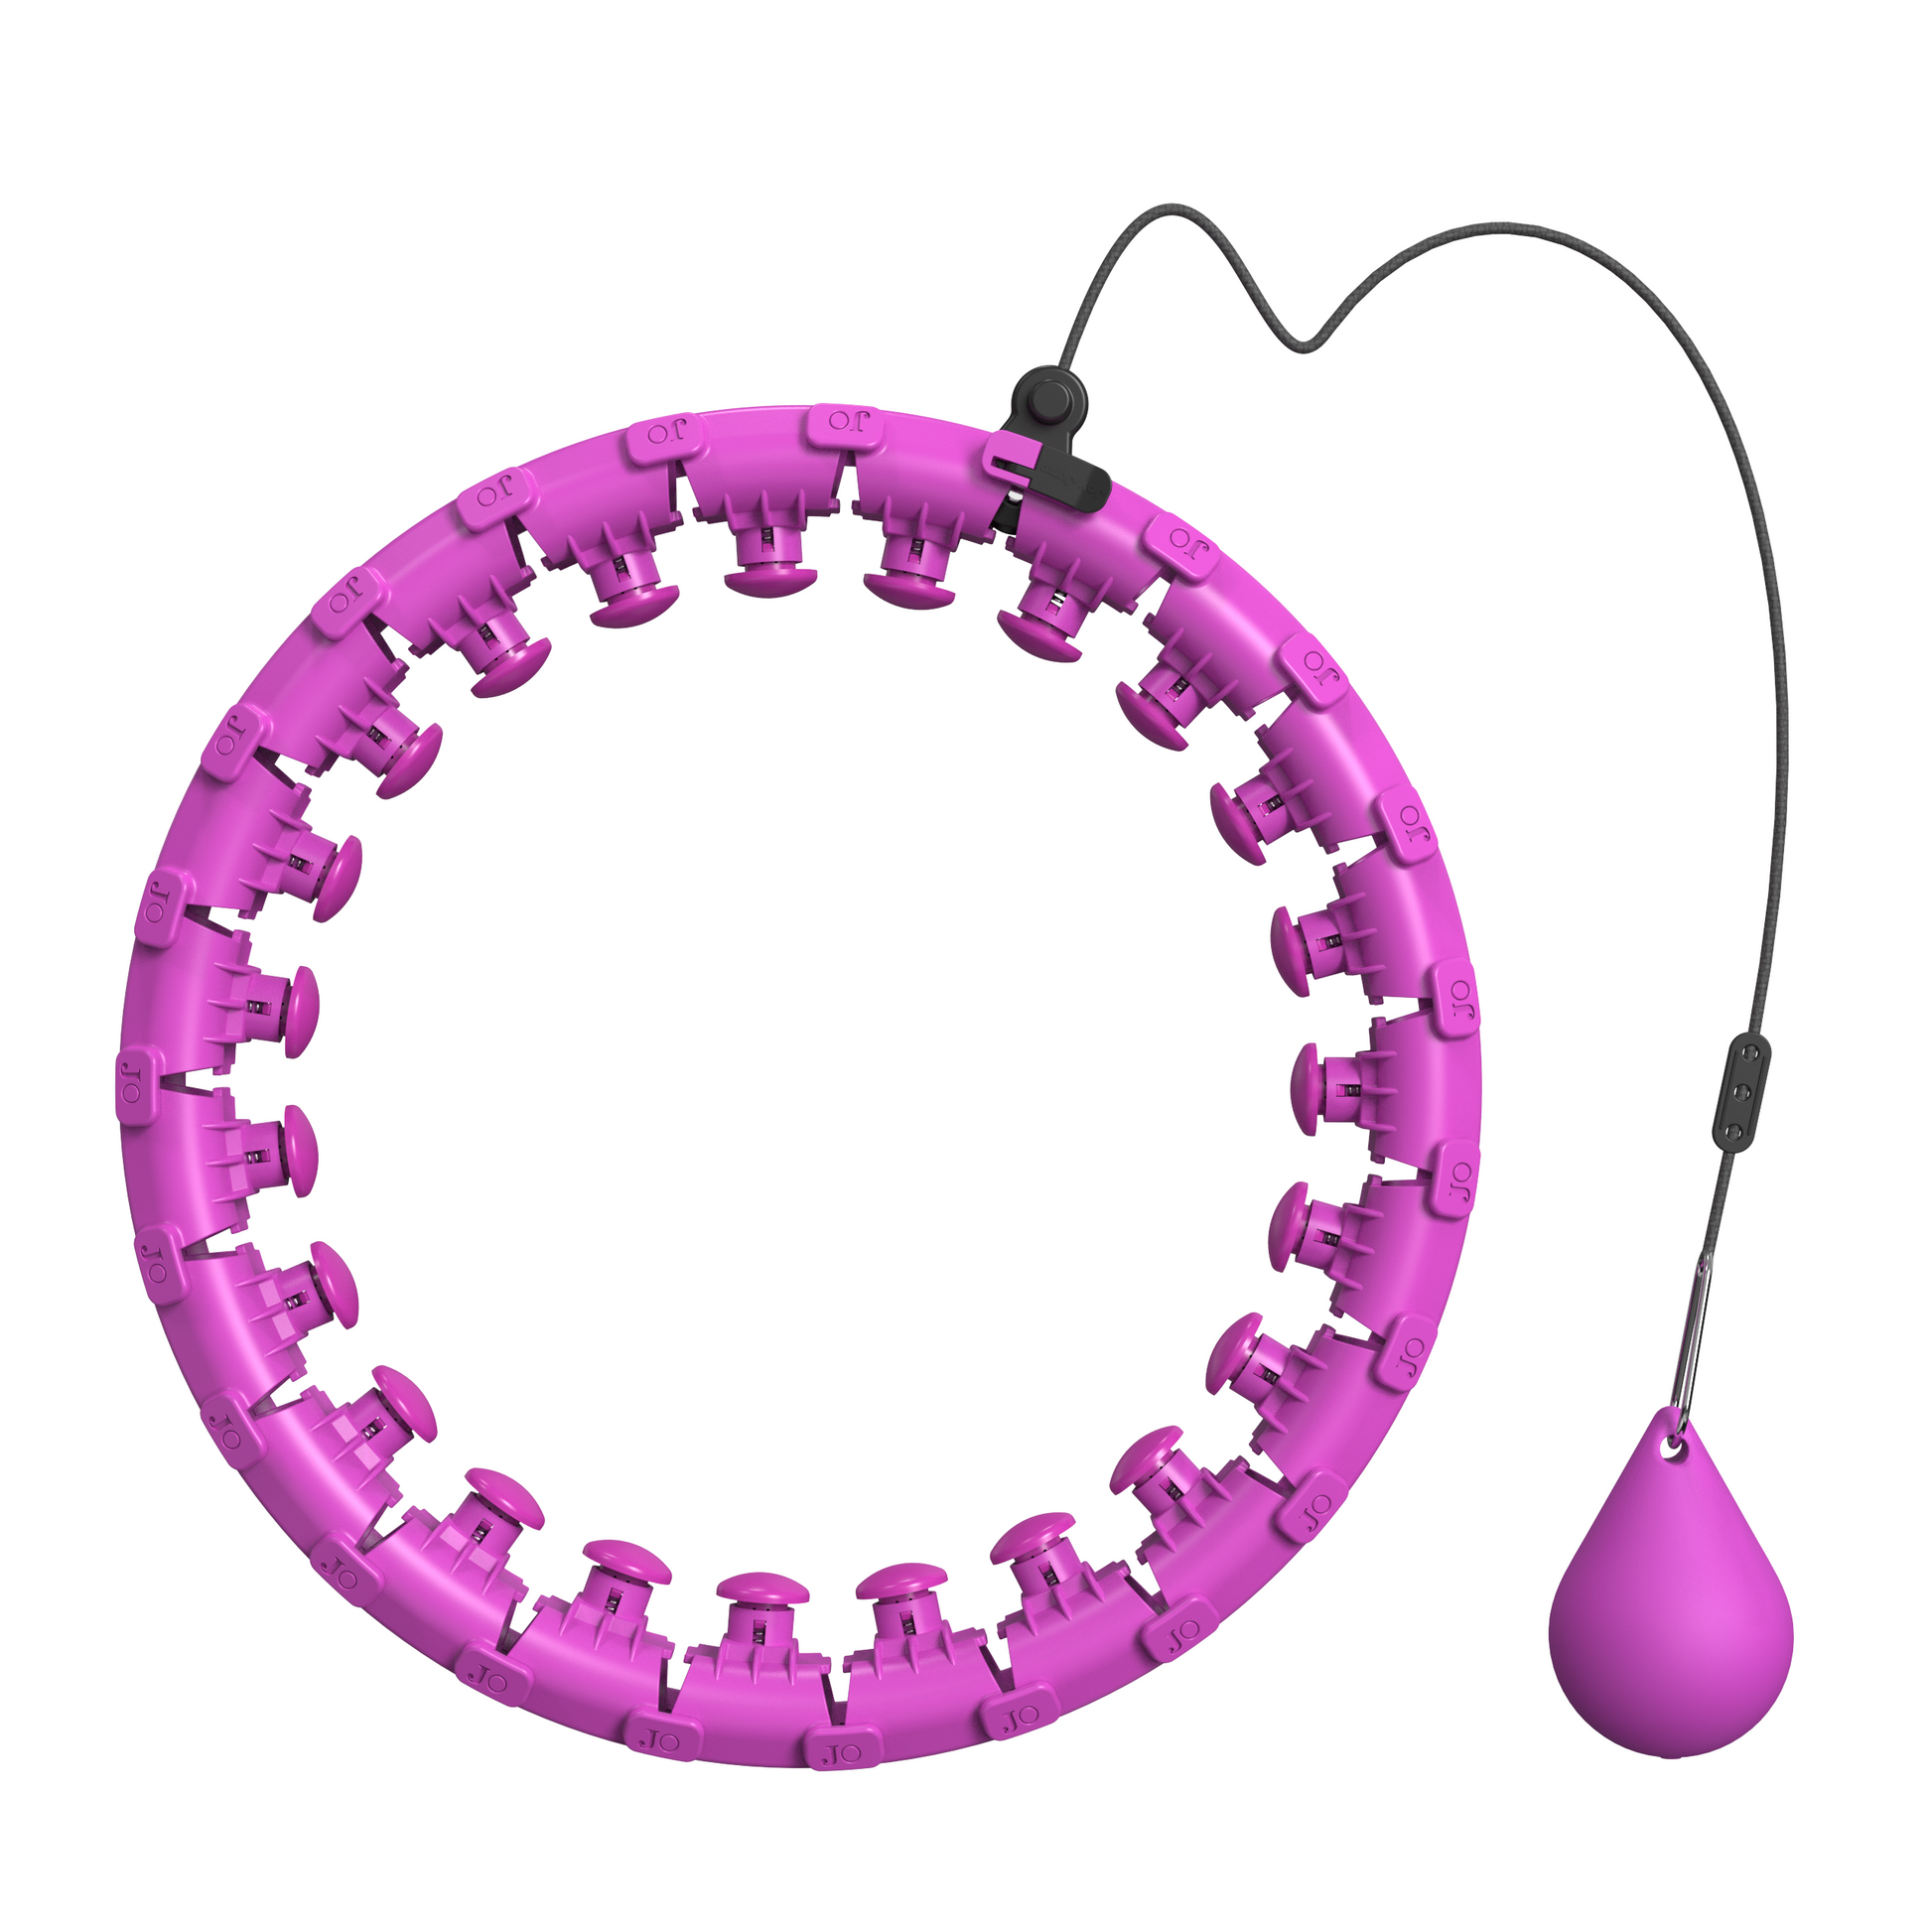 Adjustable-weighted-ball-hula-hoop-from-Importikaah's-Fitness-Star-Trio-series